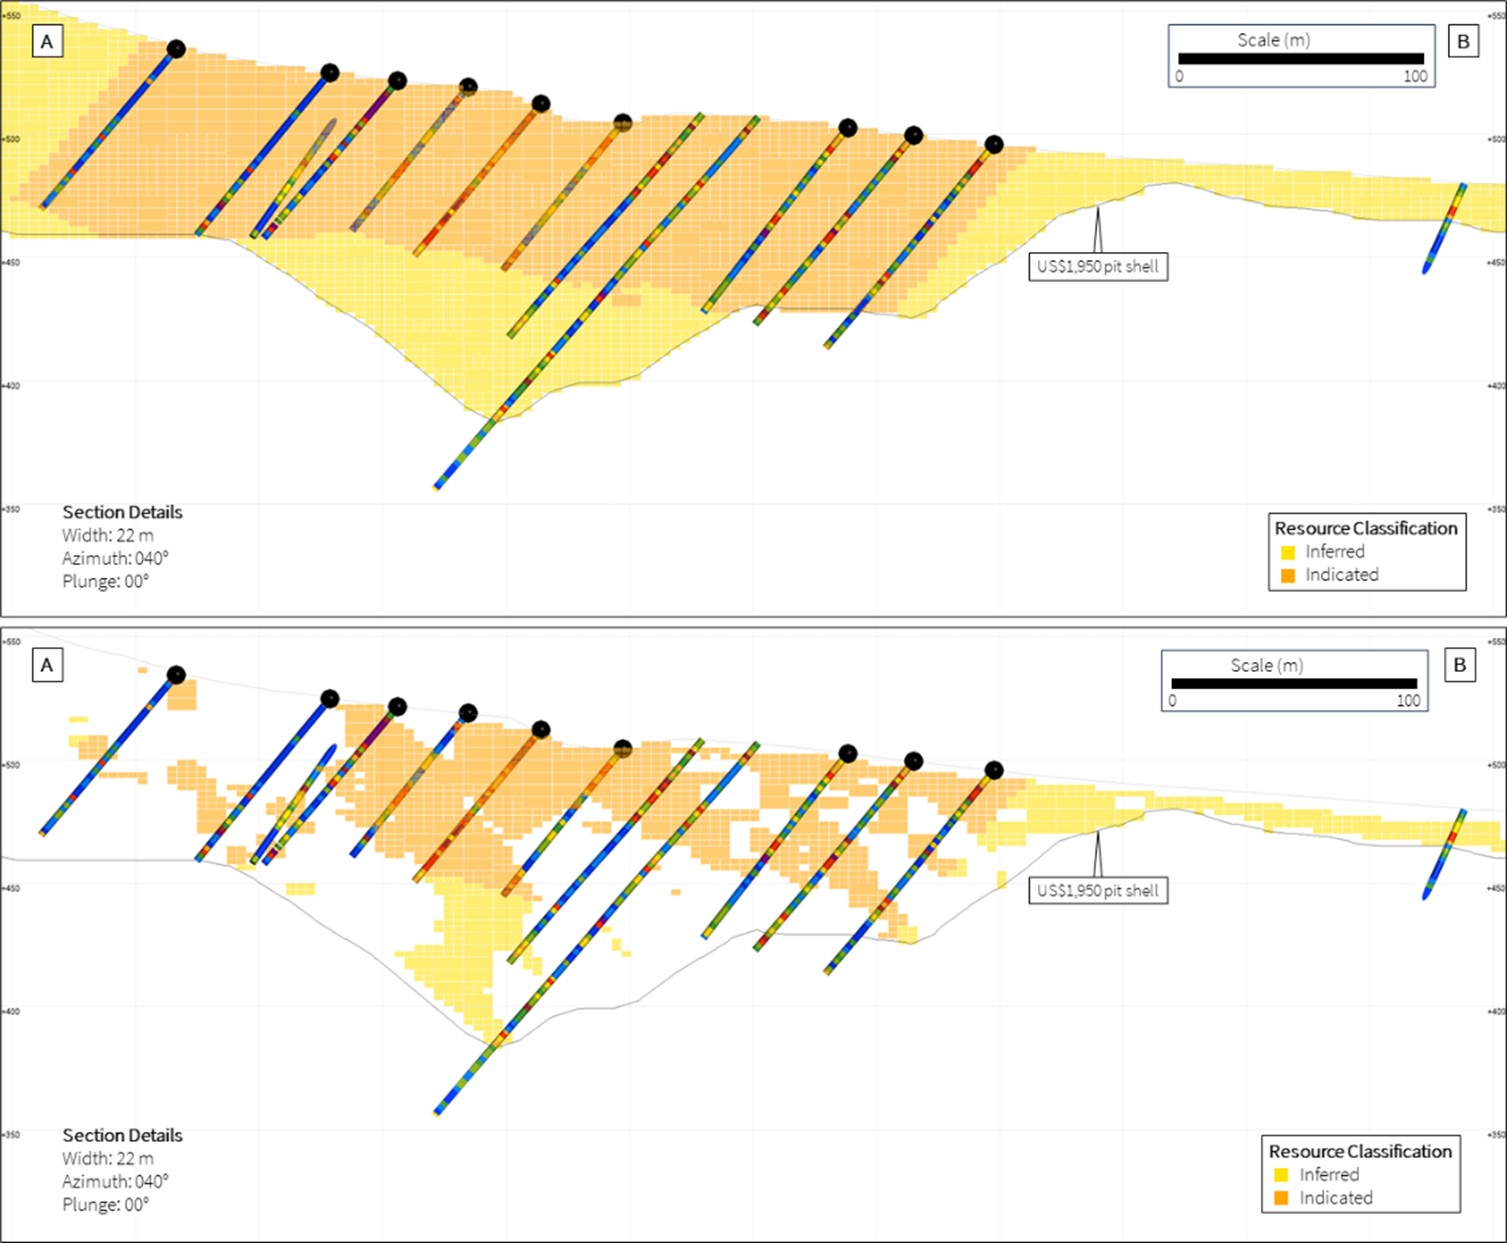 Cross-sections A-B show the (top) resource classification within the US$ 1,950 pit shell; and (bottom) the Mineral Resource classification constrained to Mineral Resources within the US$ 1,950 pit shell and above cut-off (laterite 0.5 g/t Au; saprolite 0.3 g/t Au; saprock 0.7 g/t Au; and fresh 0.9 g/t Au). Drill collars coloured black are from the 2024 RC infill drill program.